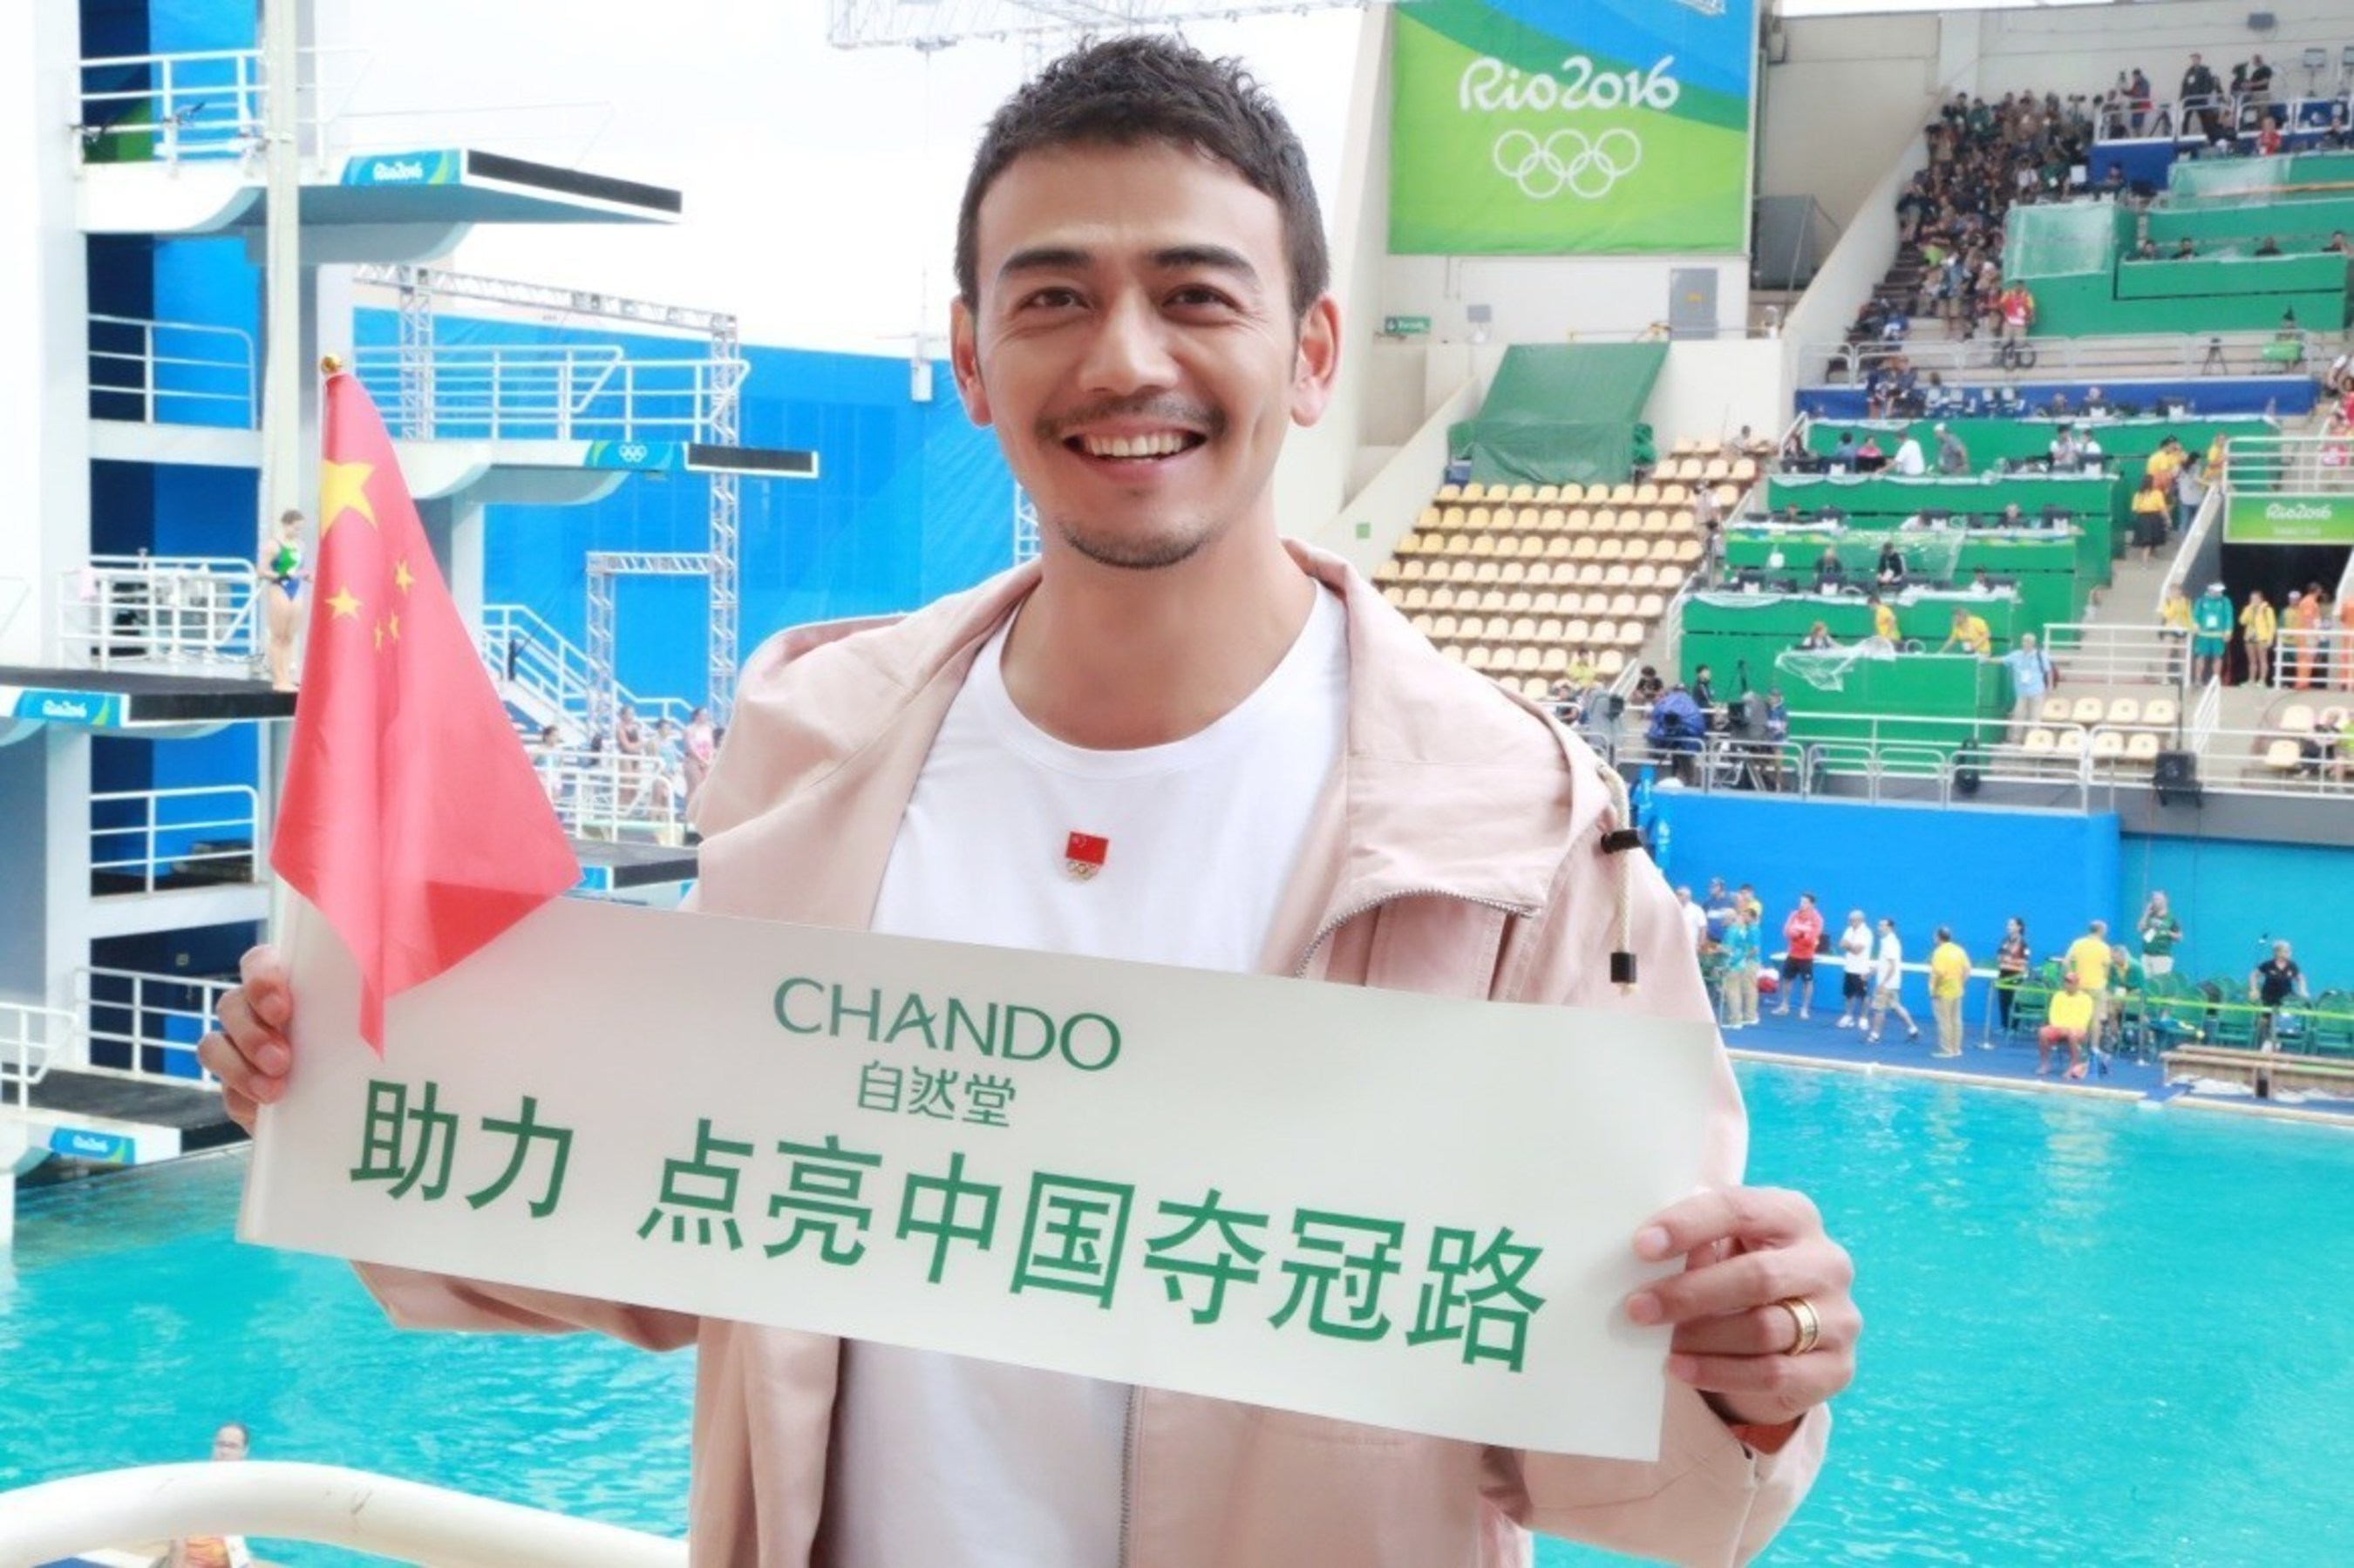 Chando's Olympic ambassador Yang Shuo present at the event to cheer on the Chinese diving team